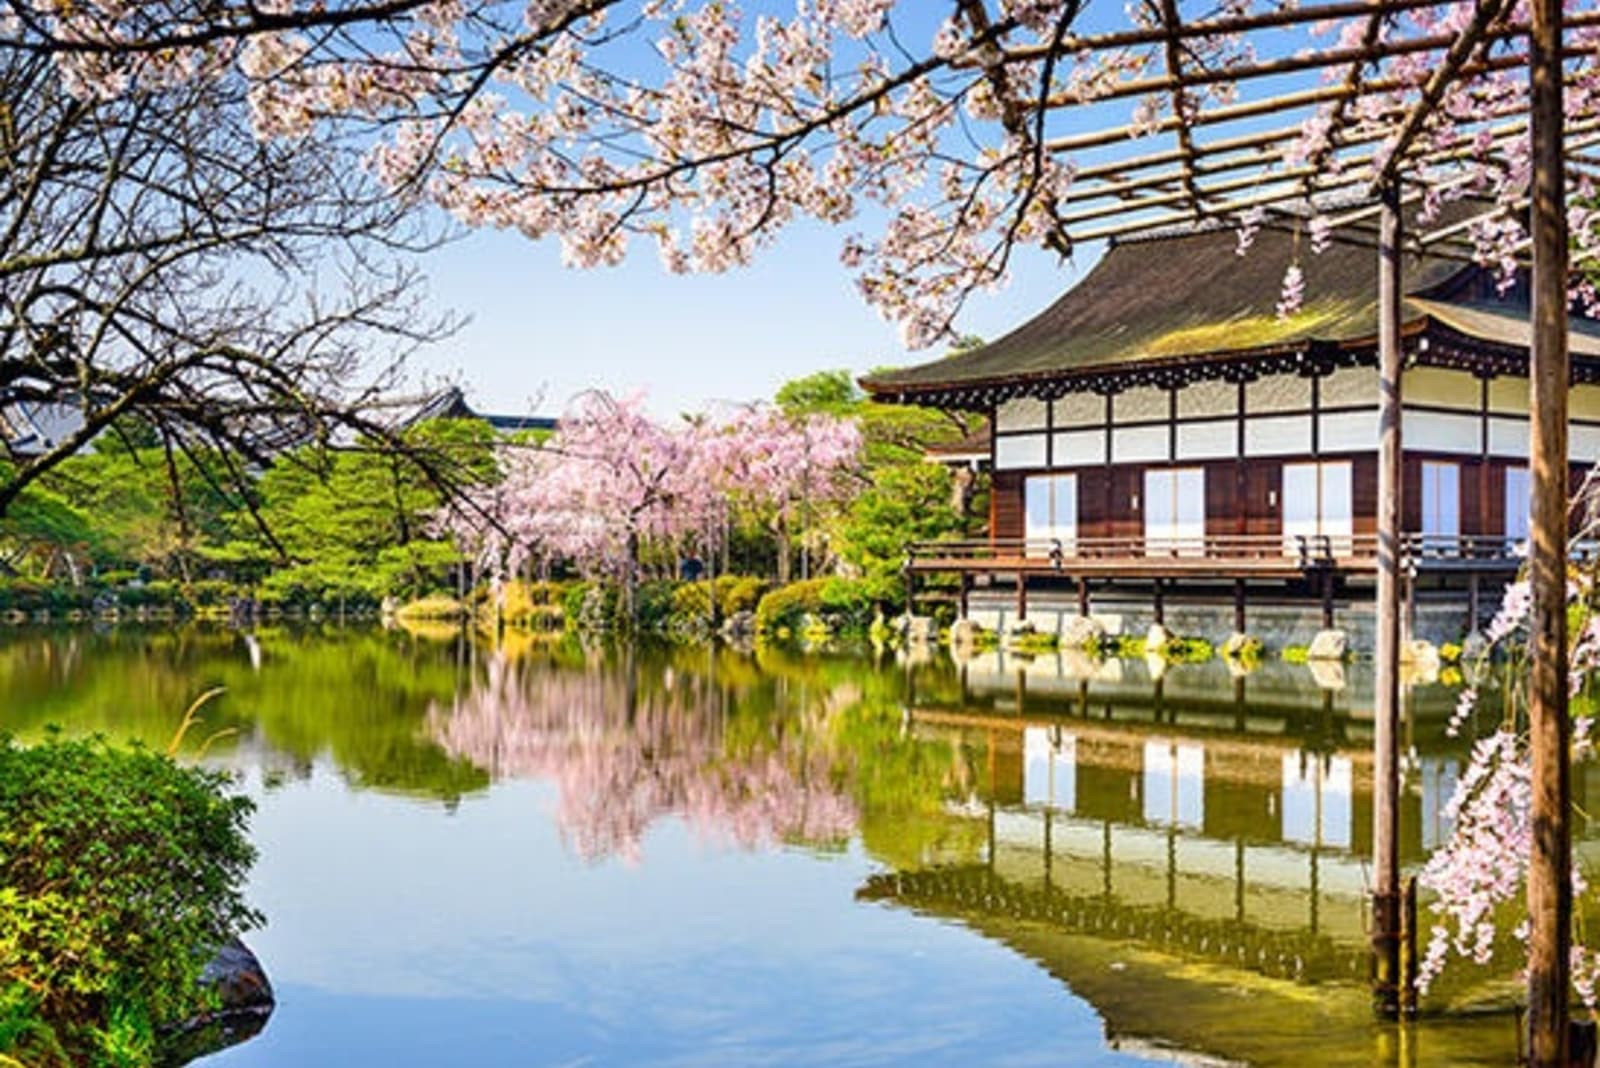 Overlooking a lake with traditional Japanese building and cherry blossoms.